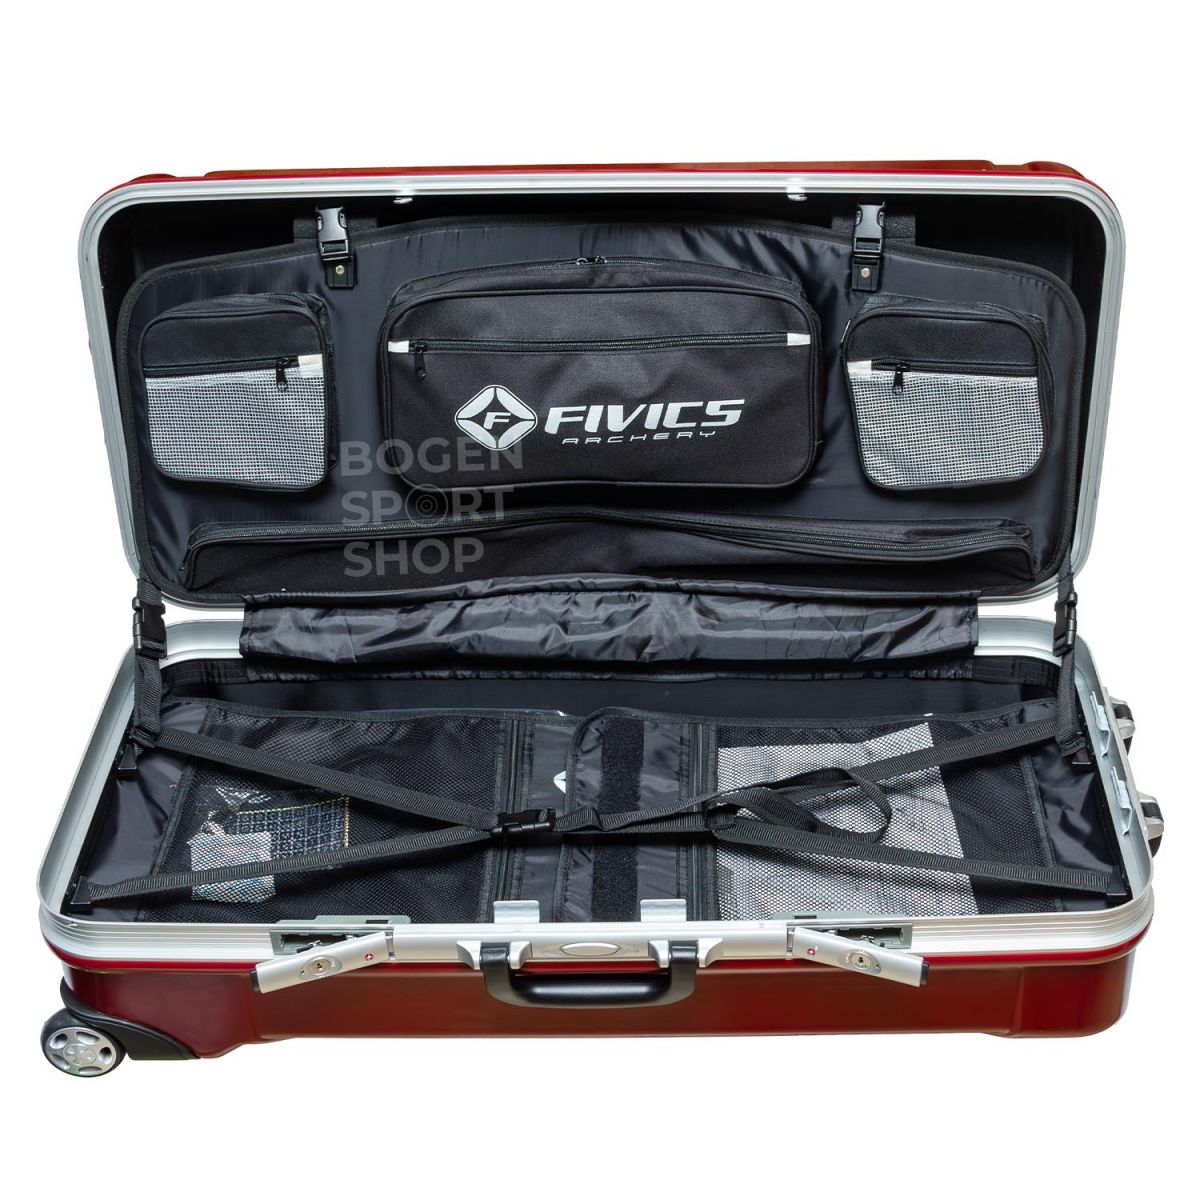 Fivics Aegis Case for Two Bows